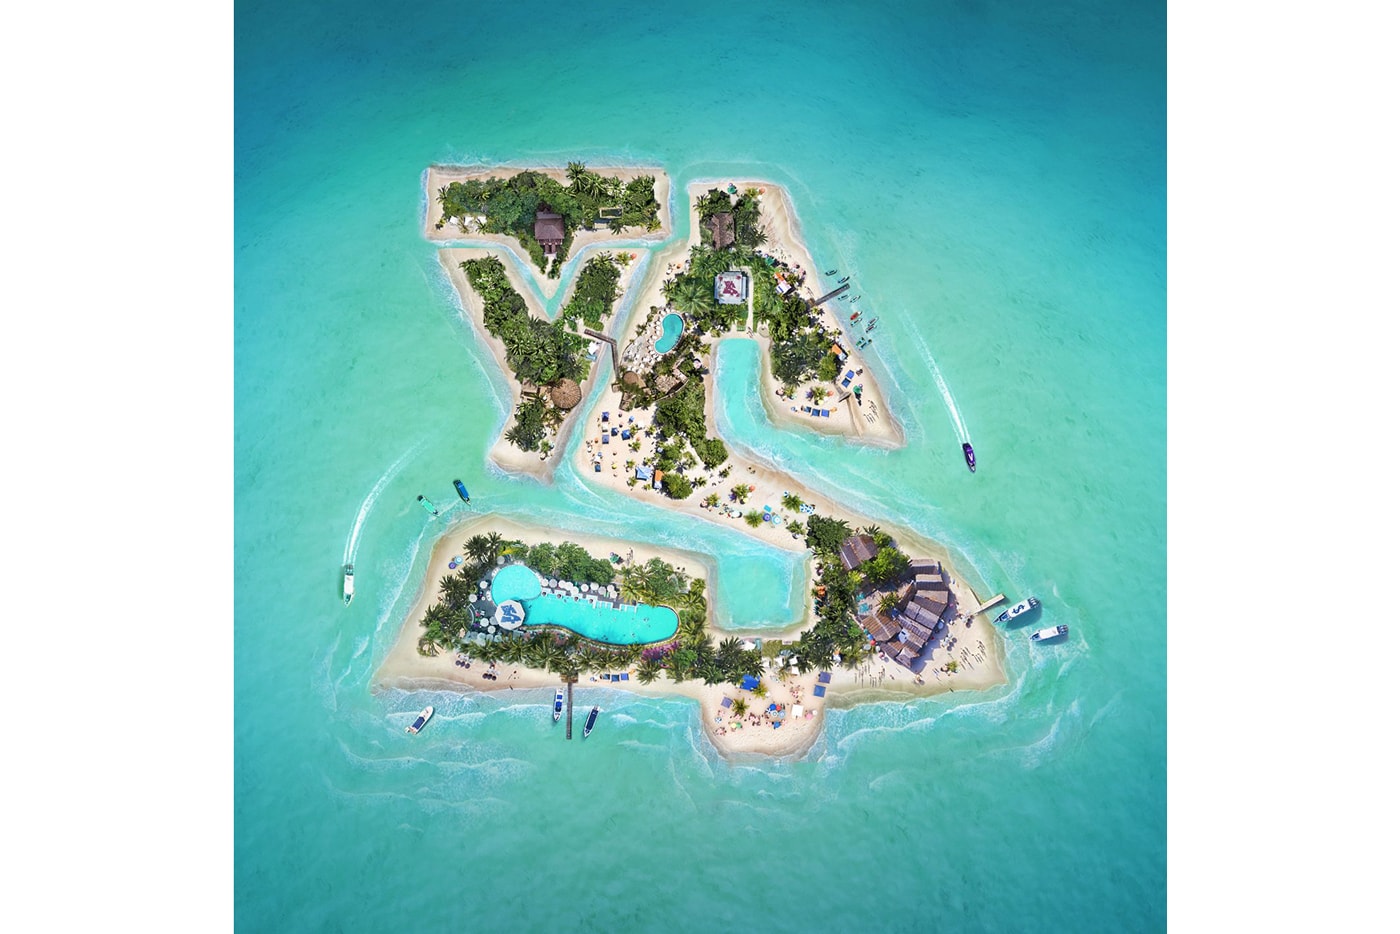 Ty Dolla Sign Beach House 3 Album Leak Download Leak Cover Stream MP3 Discography